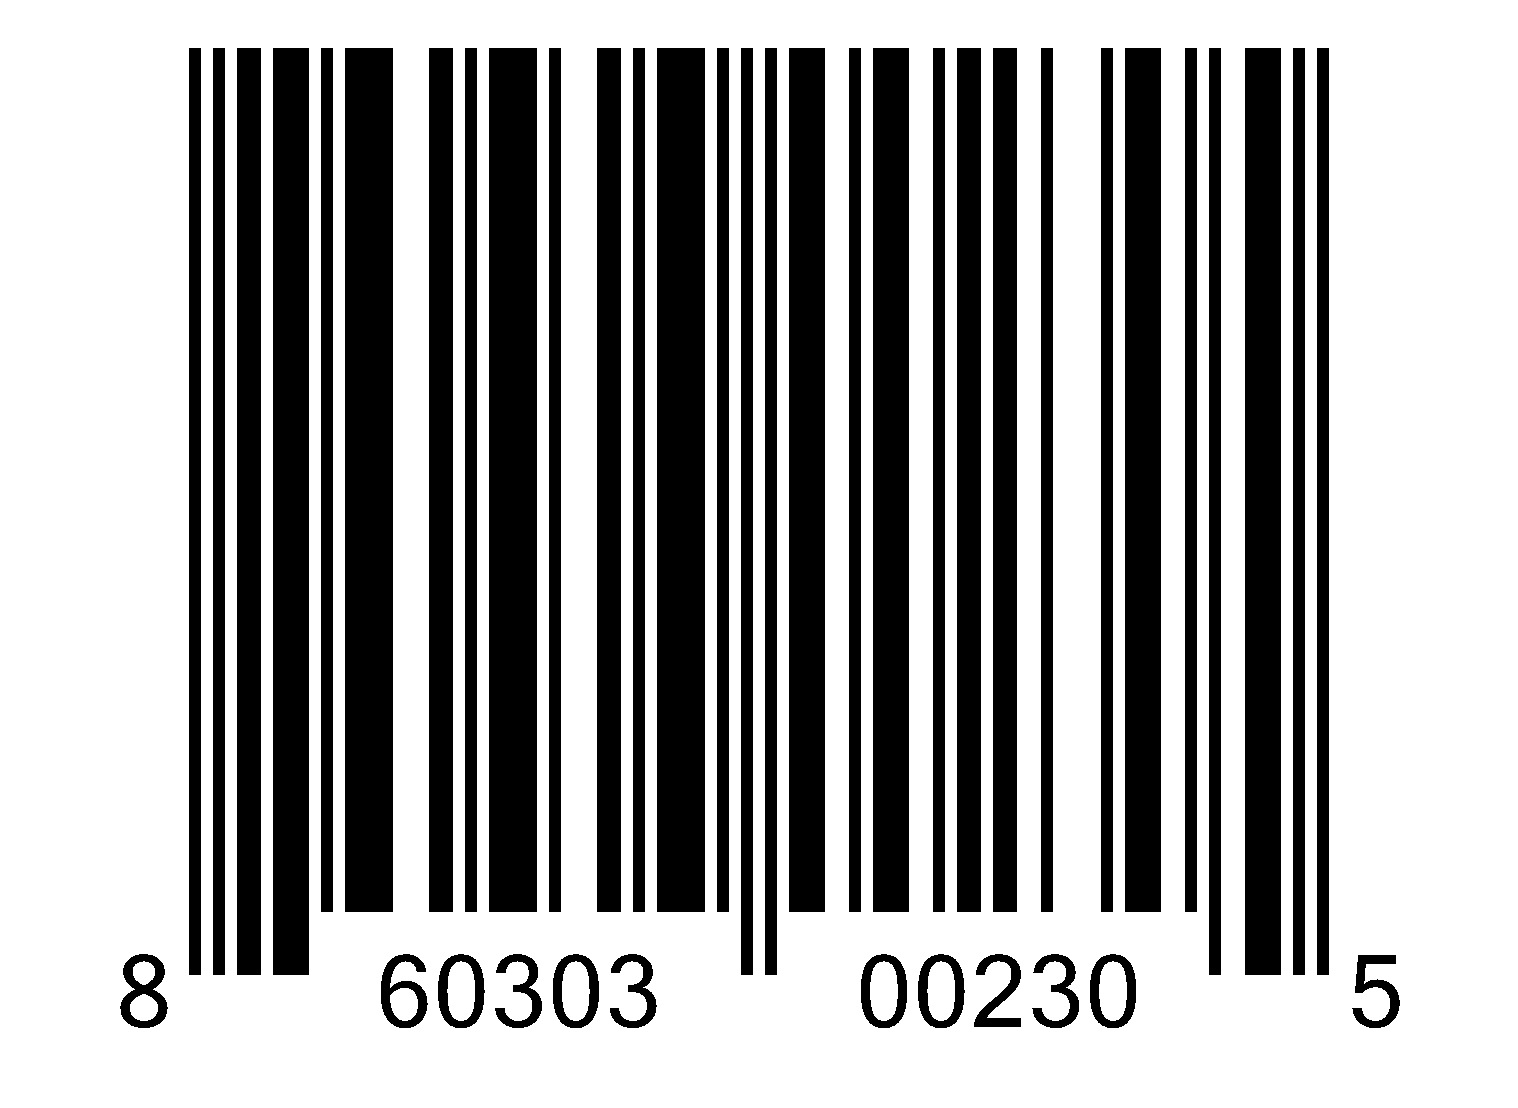 How to make barcodes for images 2017